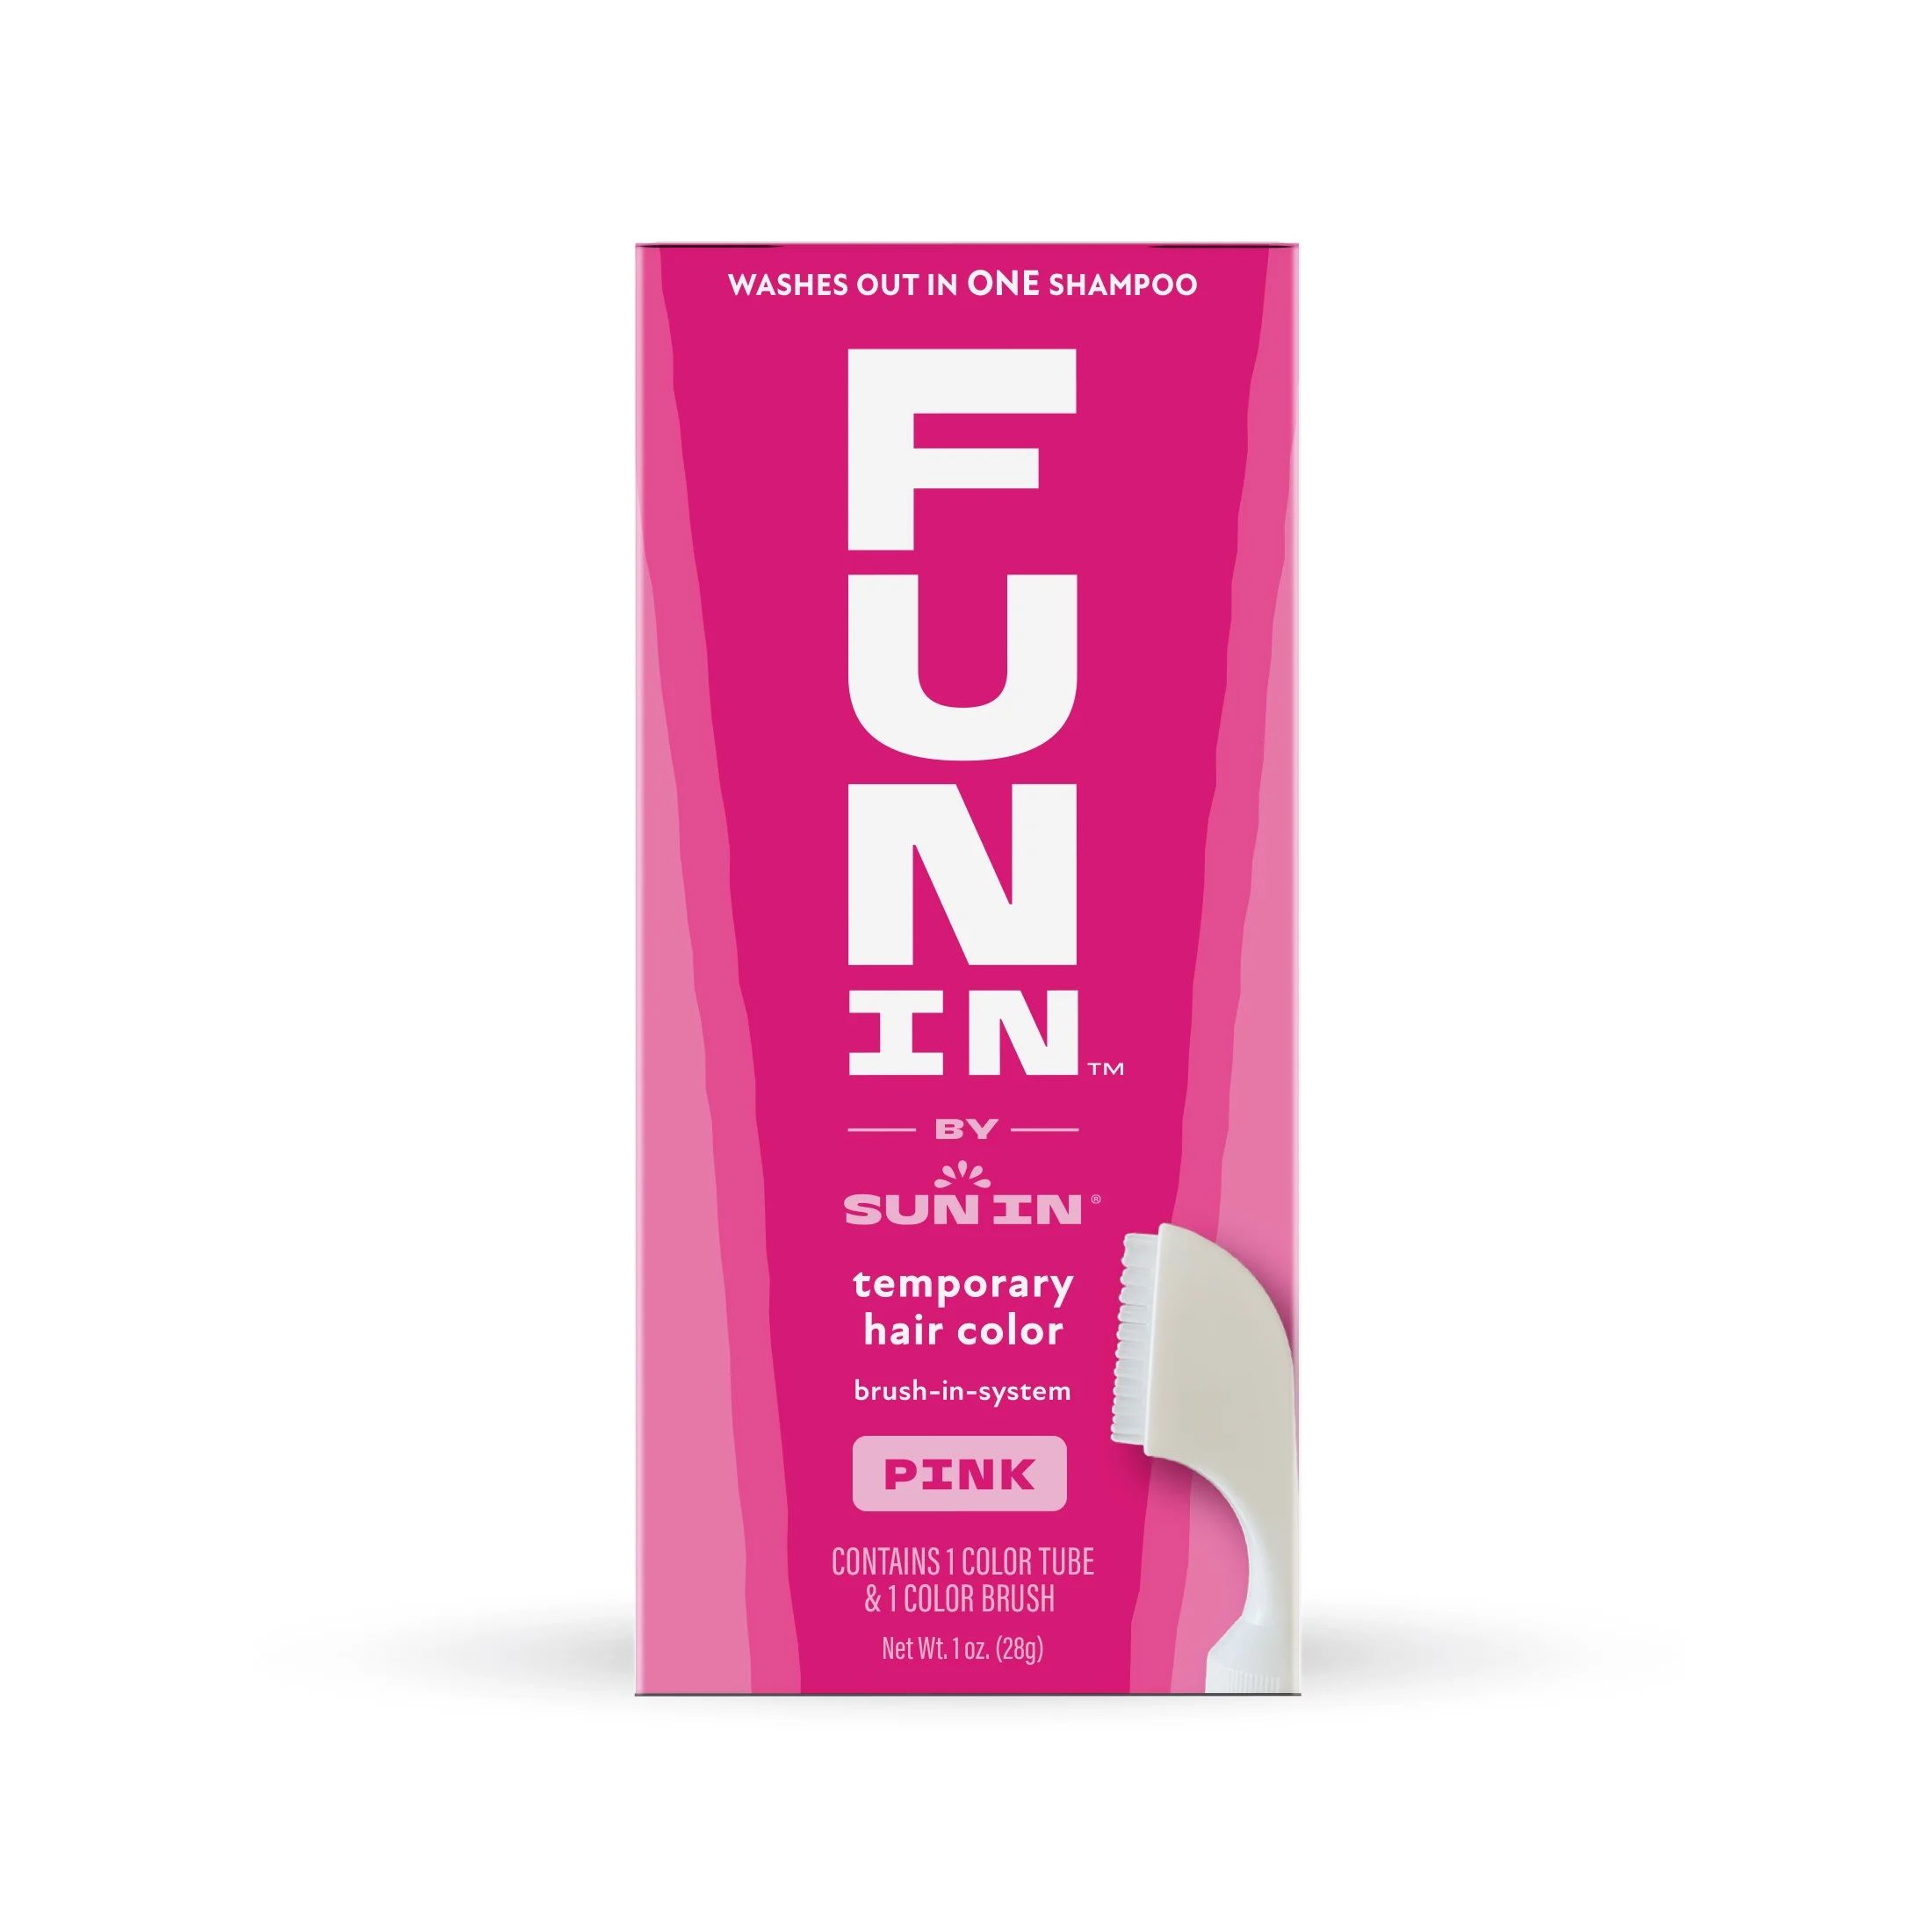 Fun In by Sun In, Temporary Hair Color Brush In System, Pink, 1 oz | Walmart (US)